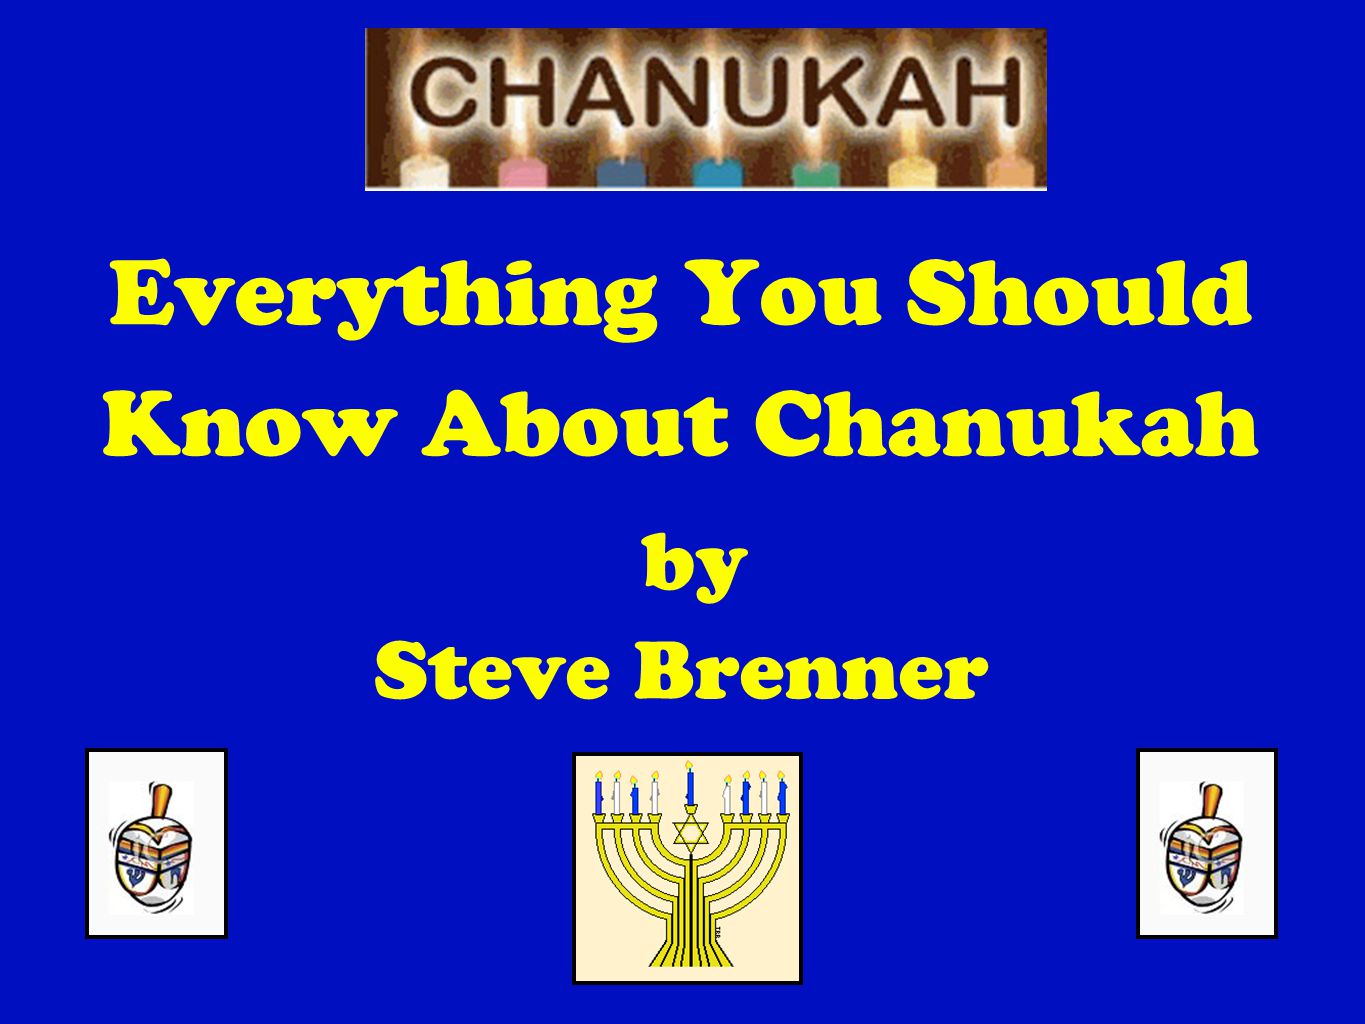 Everything You Should Know About Chanukah by Steve Brenner